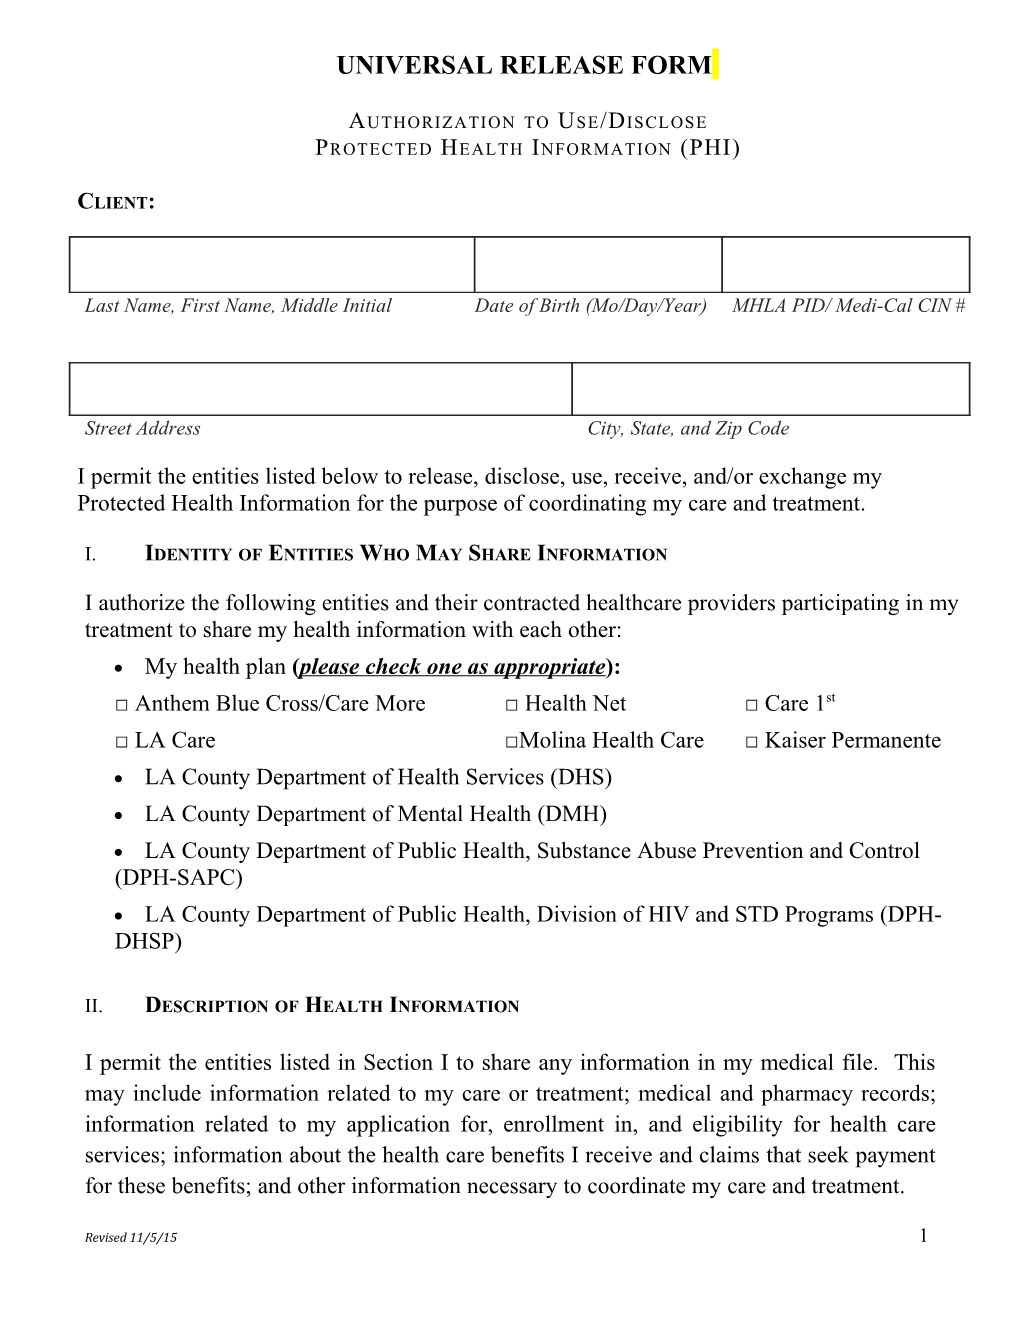 Universal Release Form